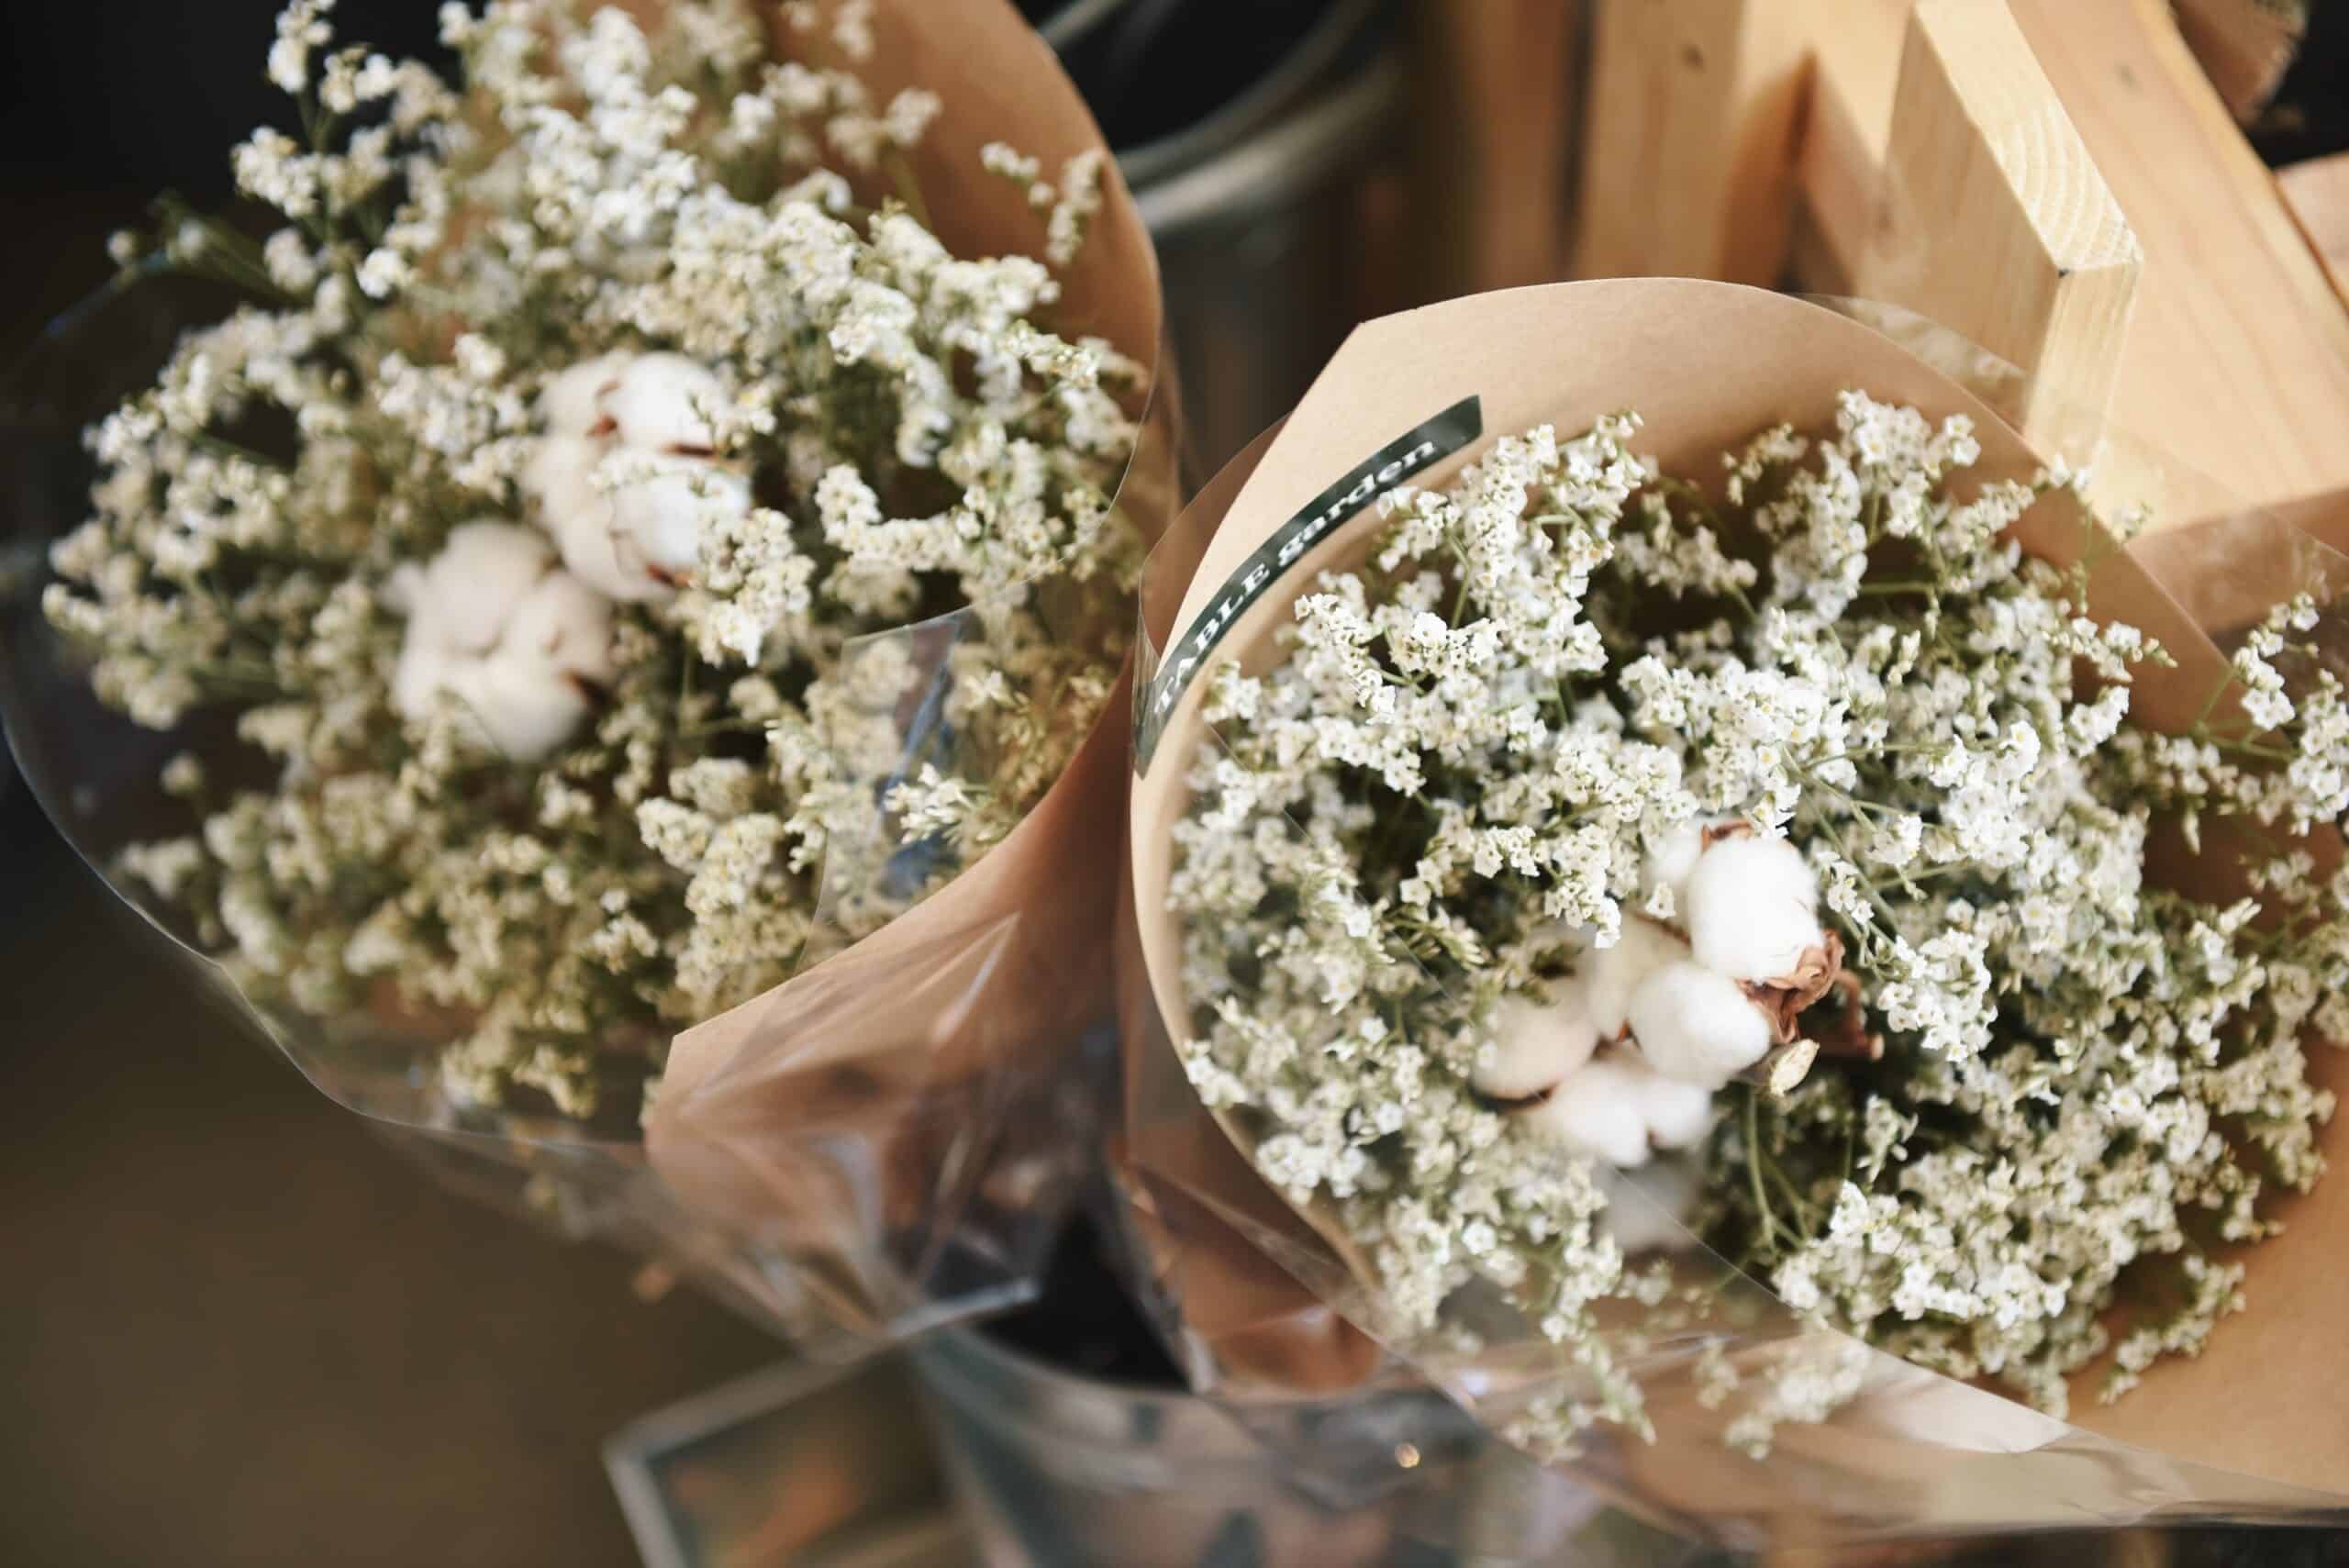 two packets of Baby's Breath flowers